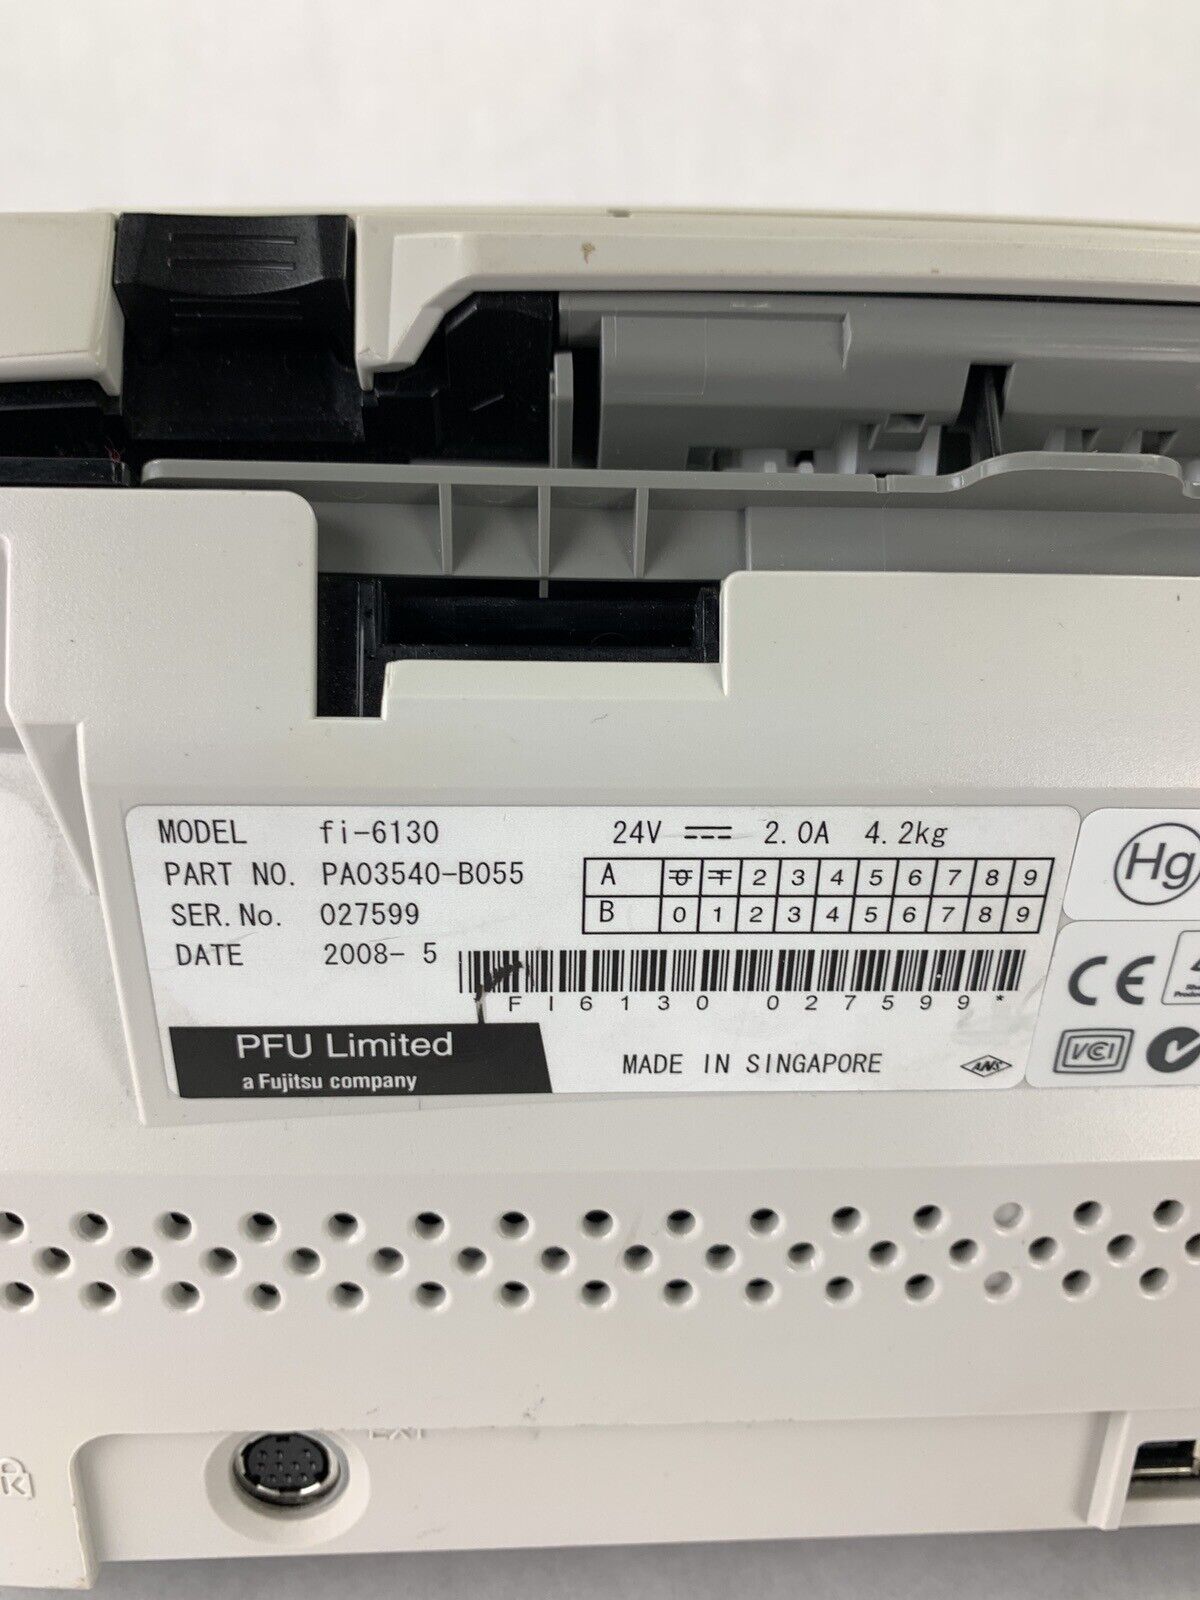 Fujitsu FI-6130 Flatbed Scanner Missing Guide Tray Rollers Going Bad